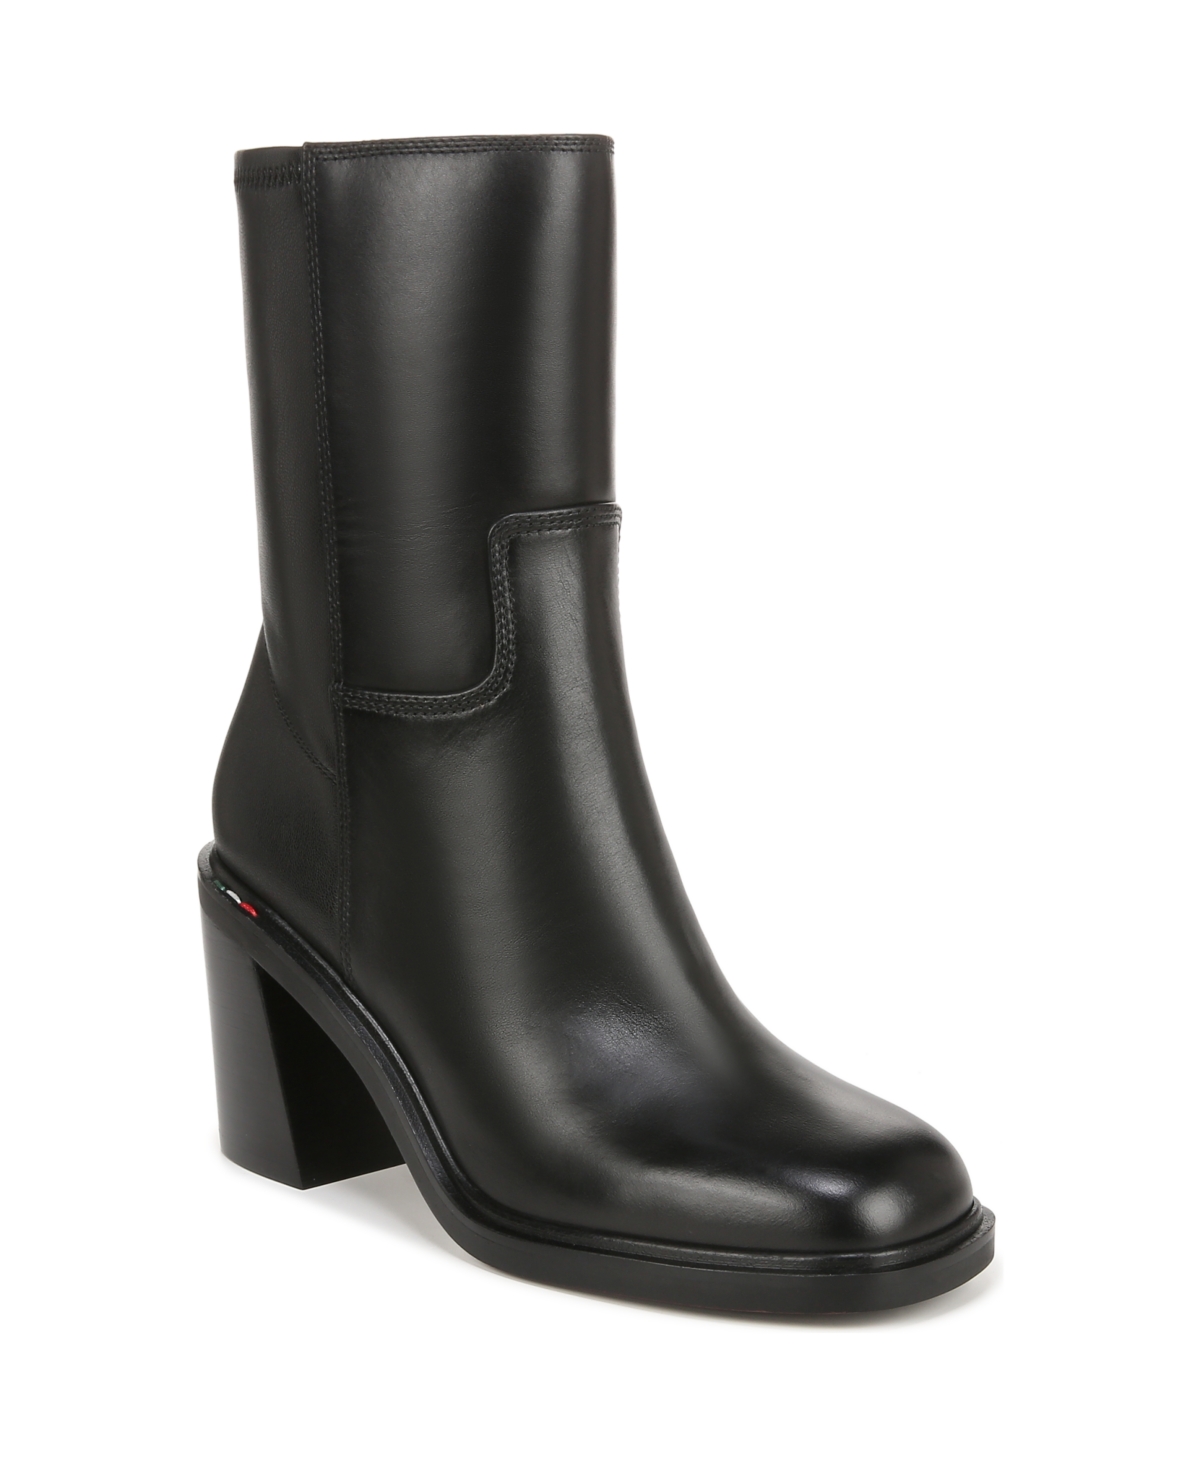 Women's Penelope Mid Shaft Boots - Black Leather